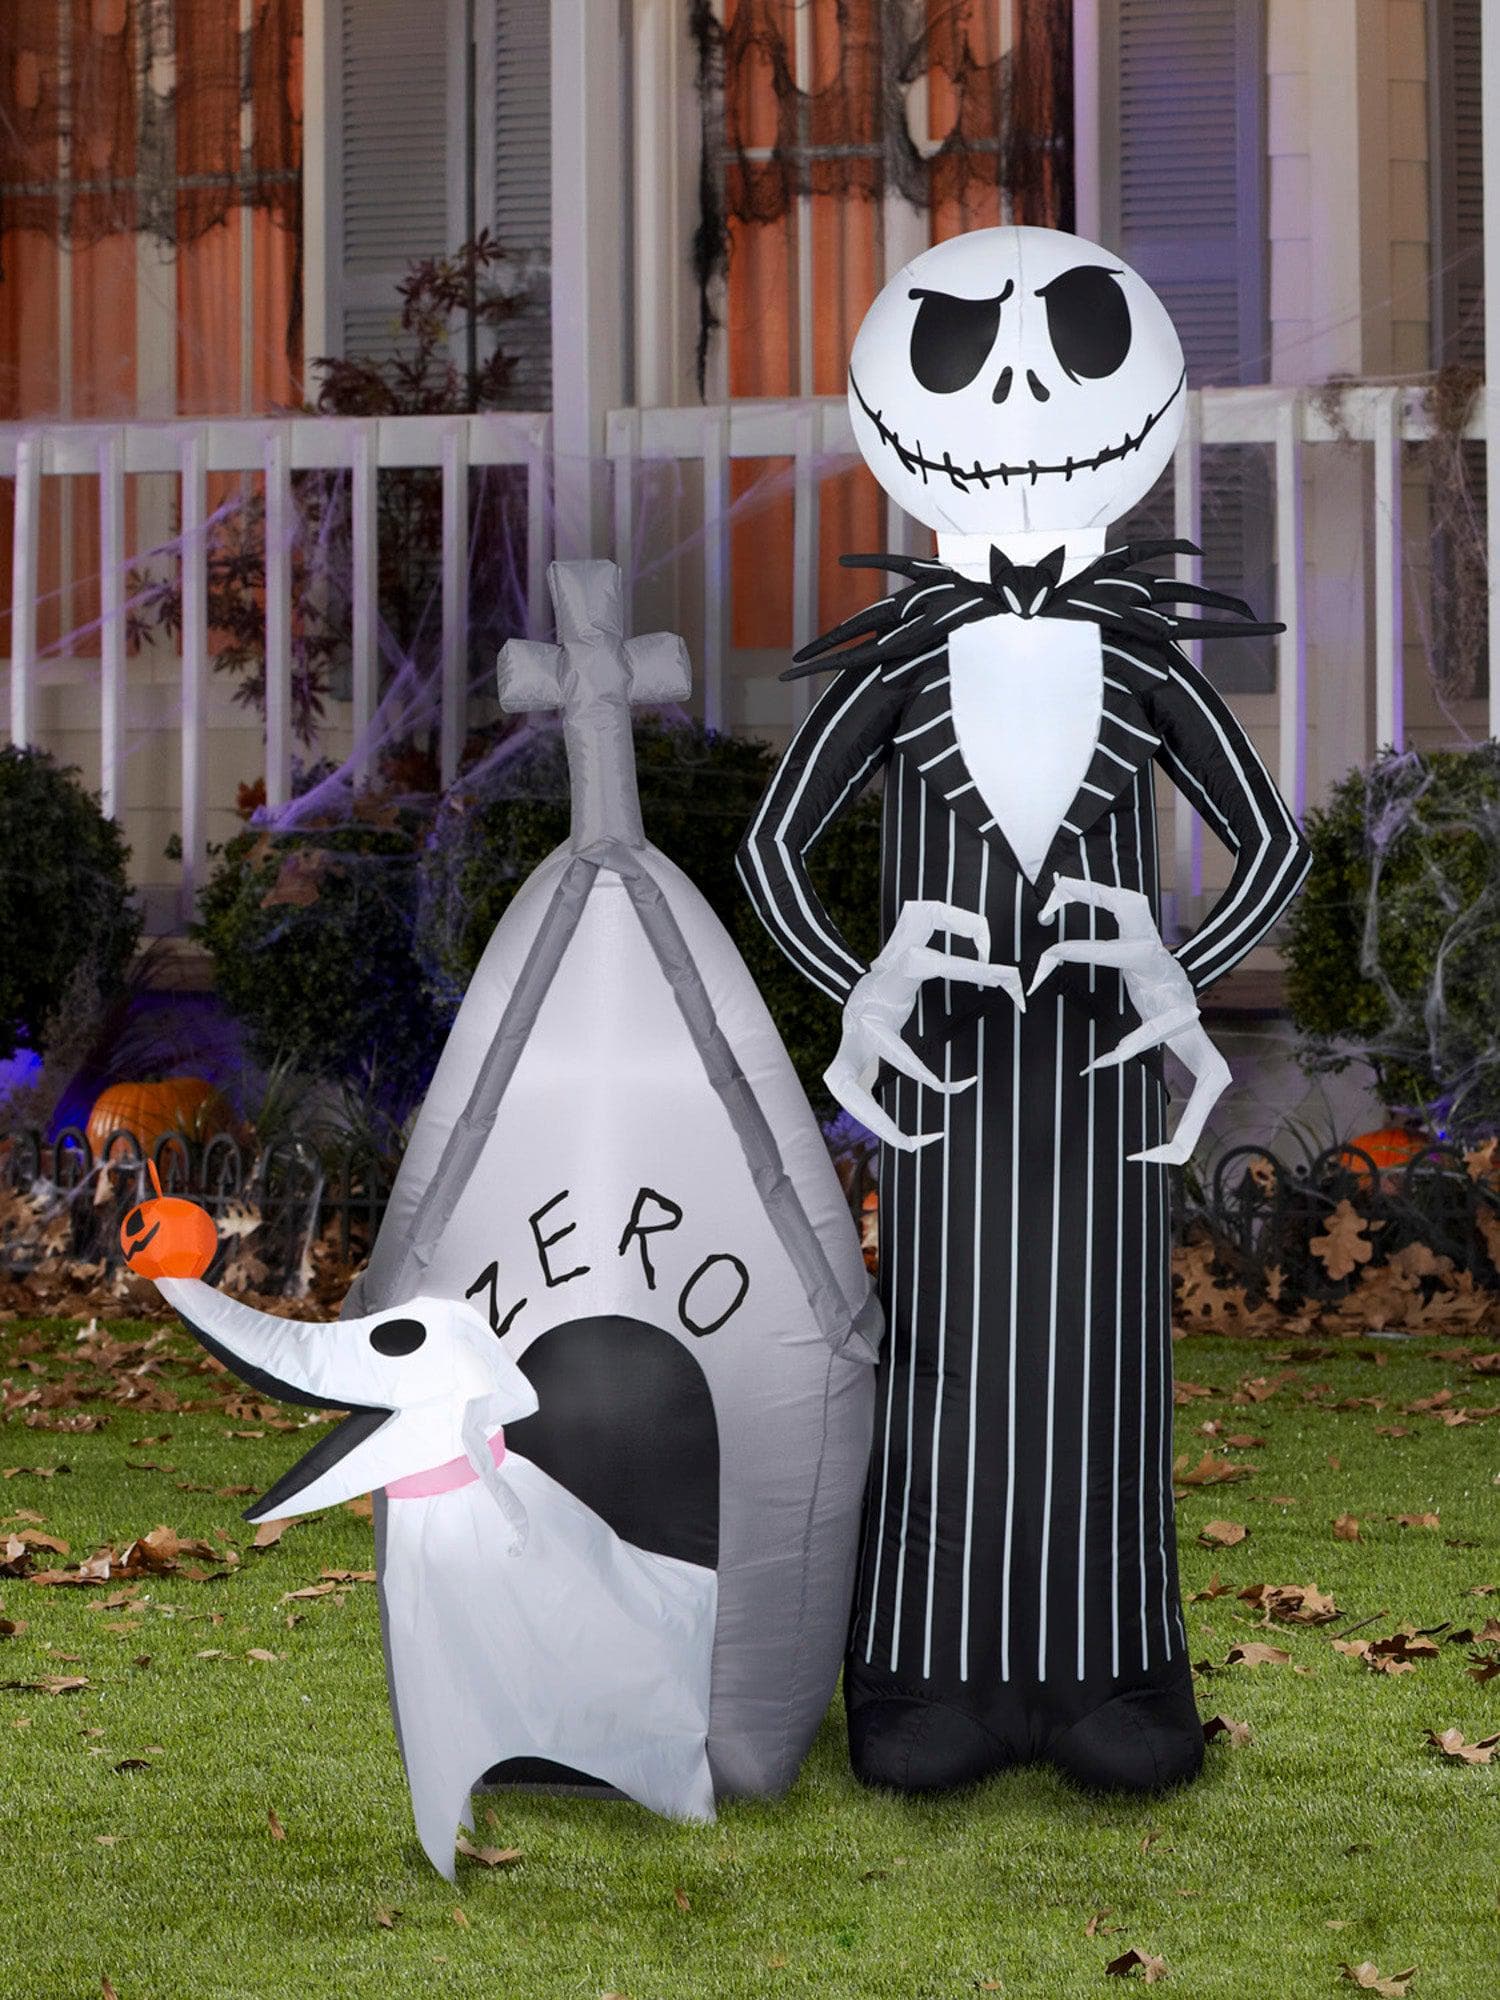 5 Foot The Nightmare Before Christmas Jack Skellington & Zero Light Up Halloween Inflatable Lawn Decor - costumes.com